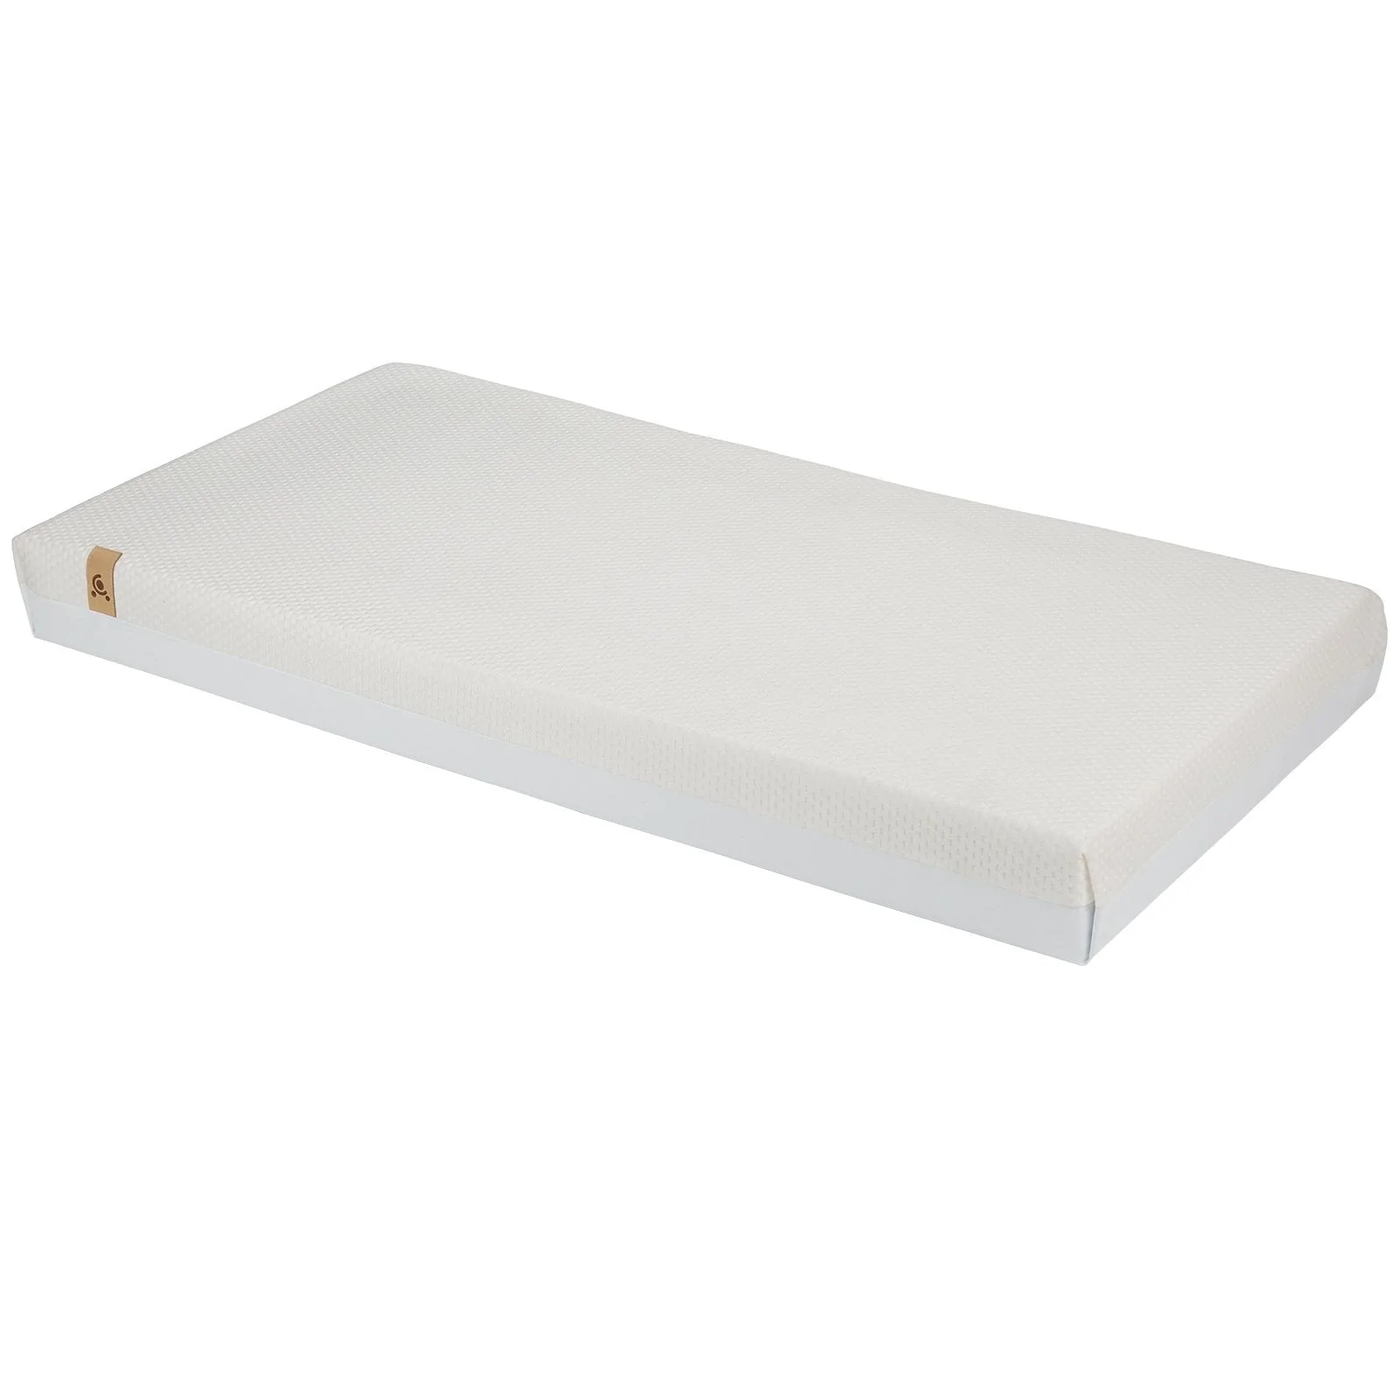 CuddleCo Harmony Hypo Allergenic Bamboo Sprung Cot Bed Mattress